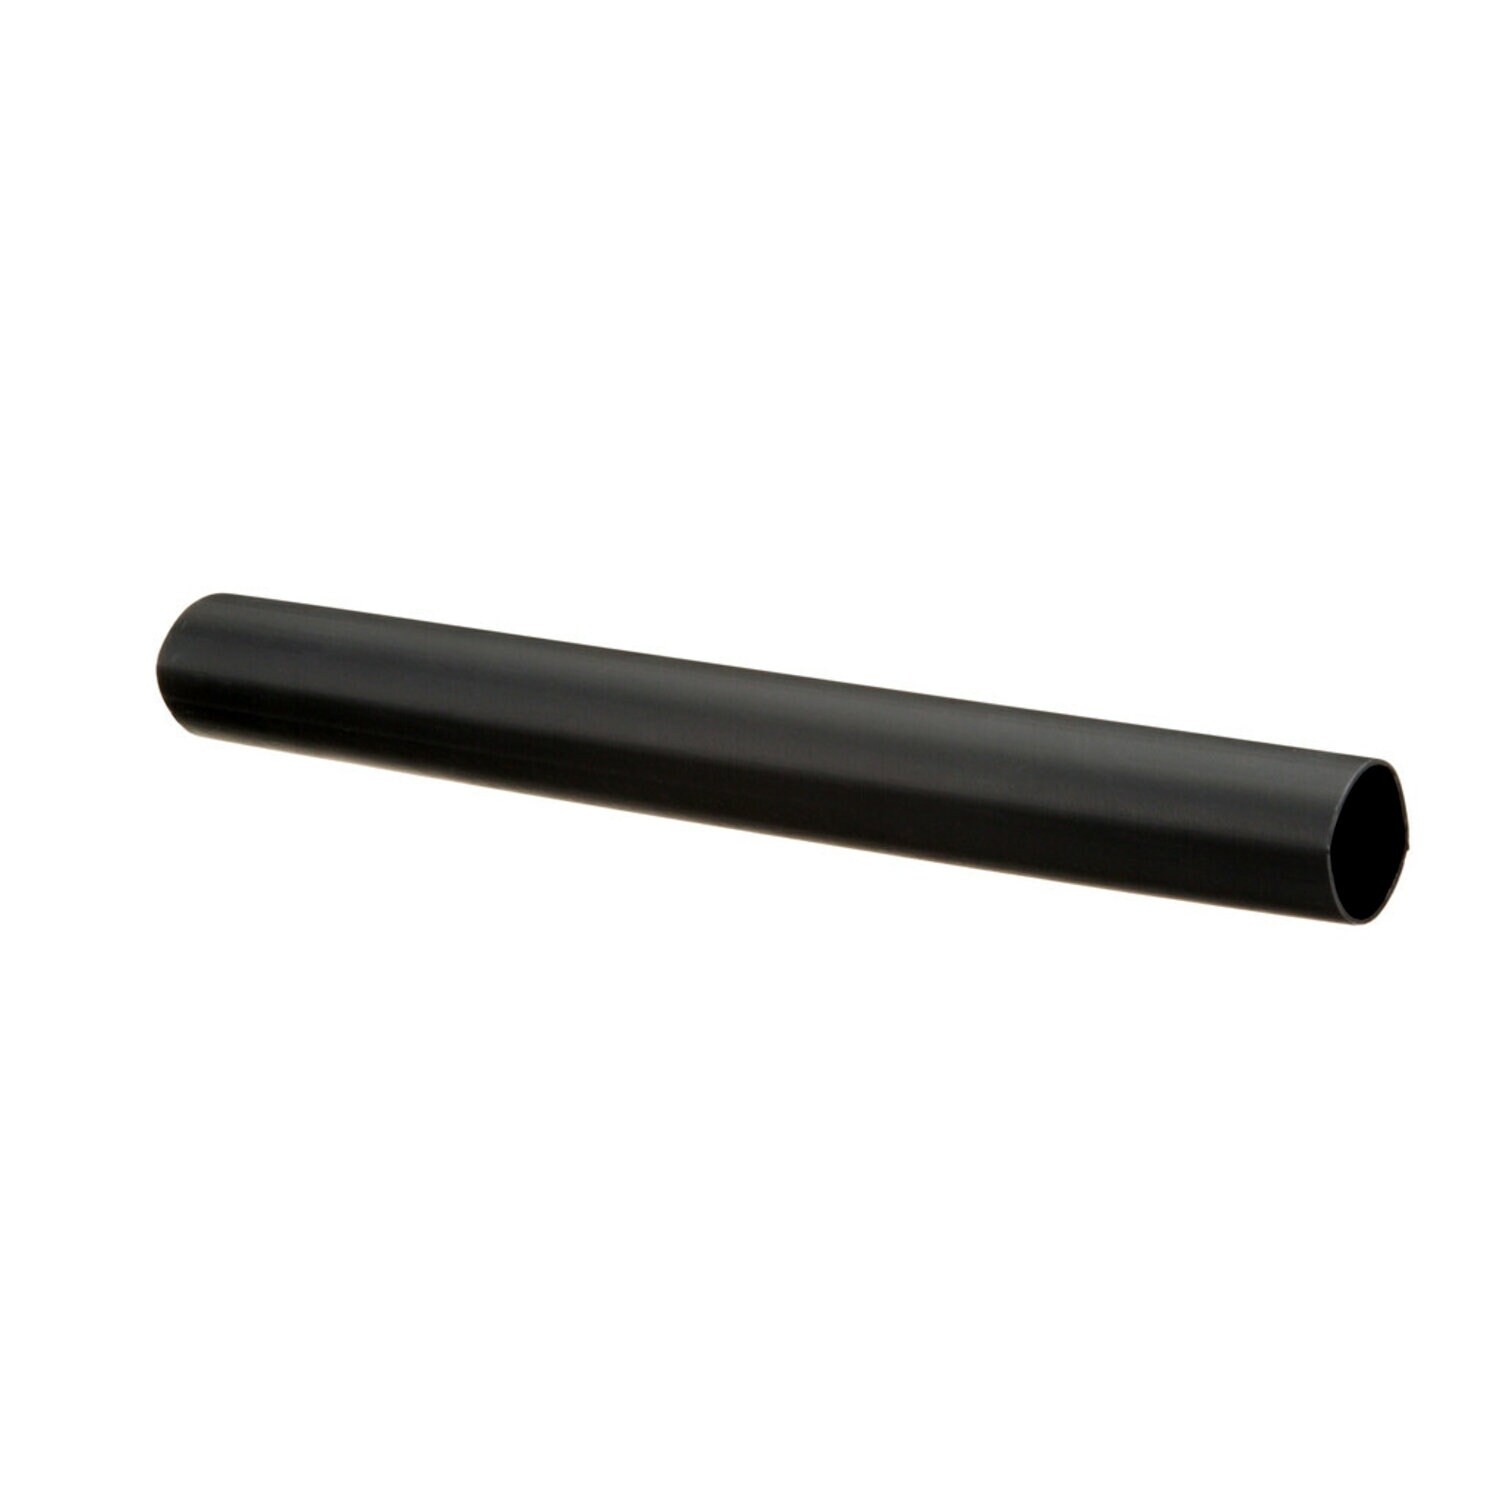 7000132157 - 3M Heat Shrink Heavy-Wall Cable Sleeve ITCSN-1100, 2 to 4/0 AWG, Black,
9 in Length, 100 Pieces/Case